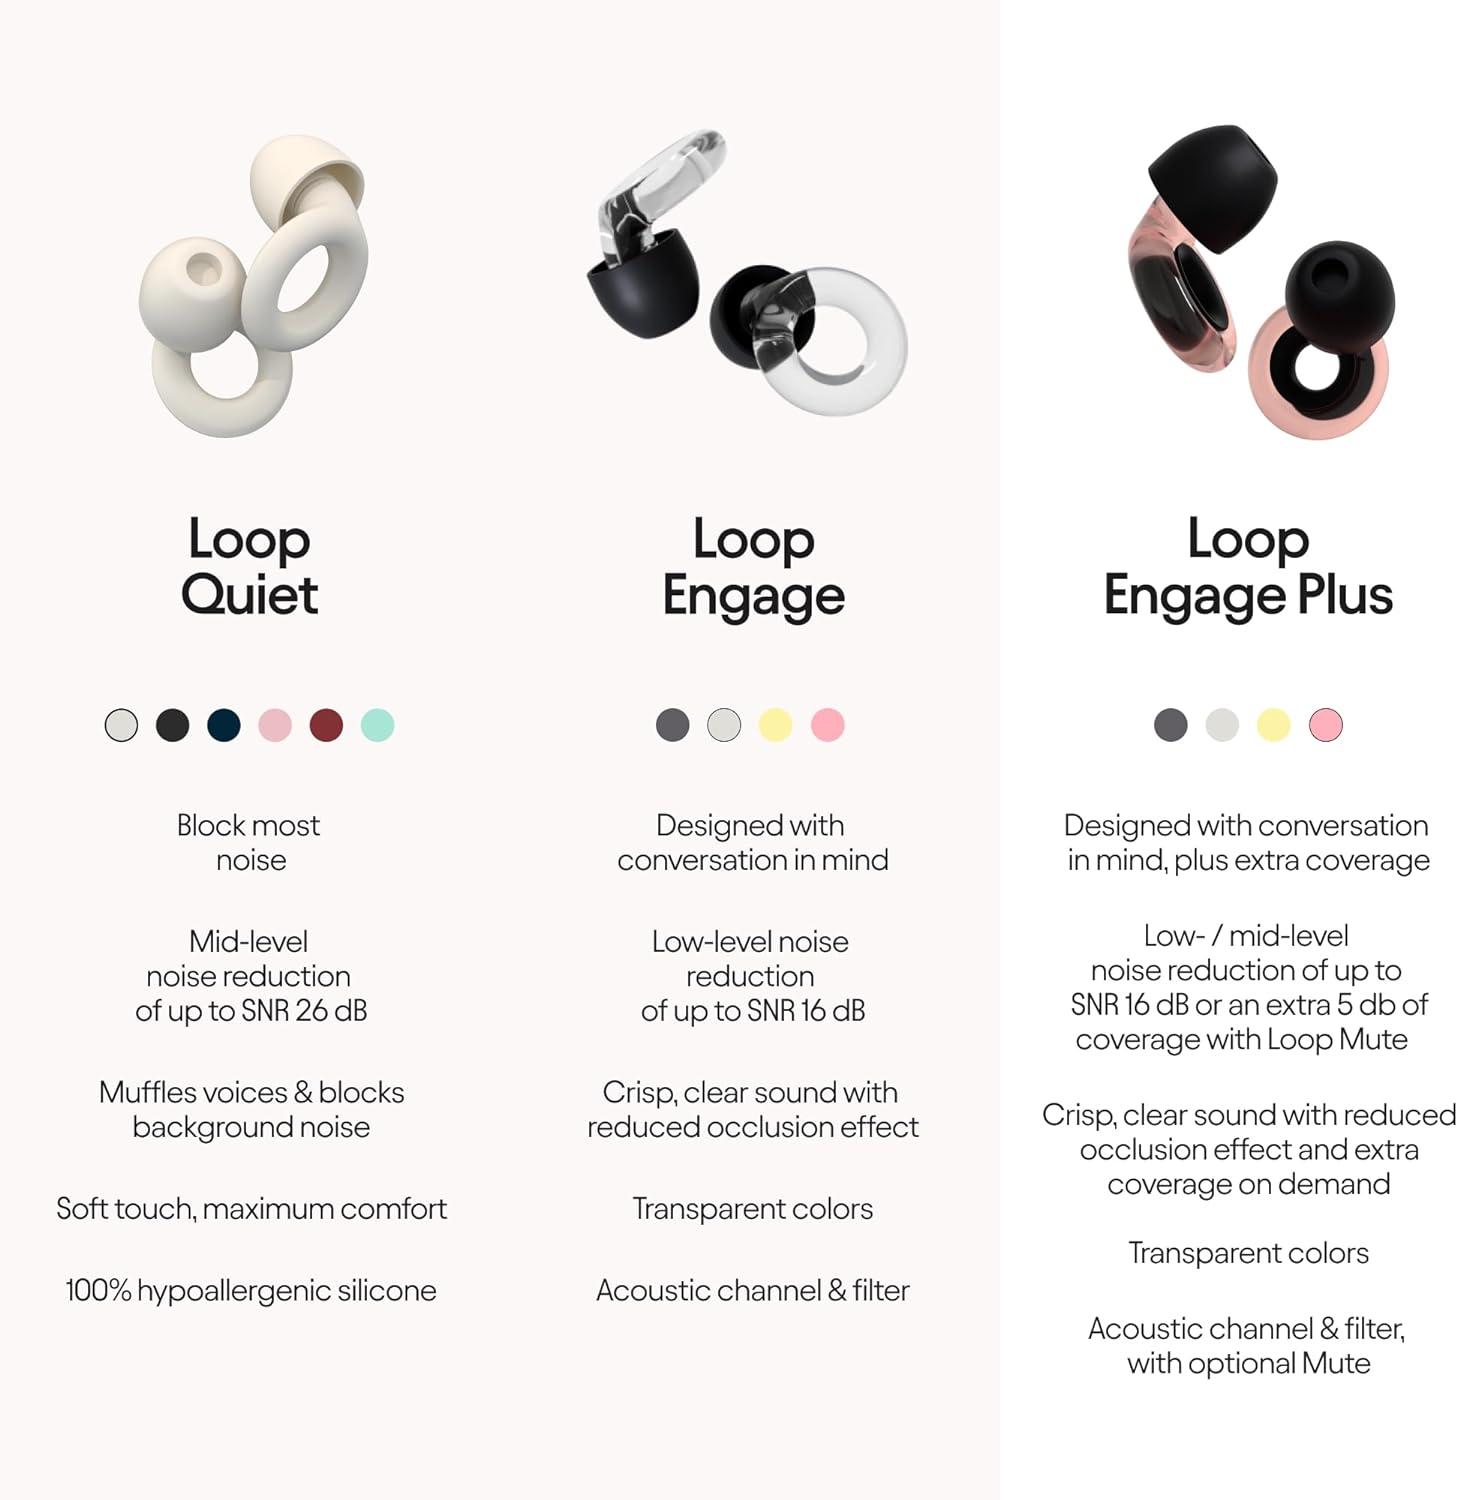 Loop Engage Plus Earplugs – Low-Level Noise Reduction with Clear Speech –  for Conversation, Social Gatherings, Noise Sensitivity & Parenting – 8 Ear